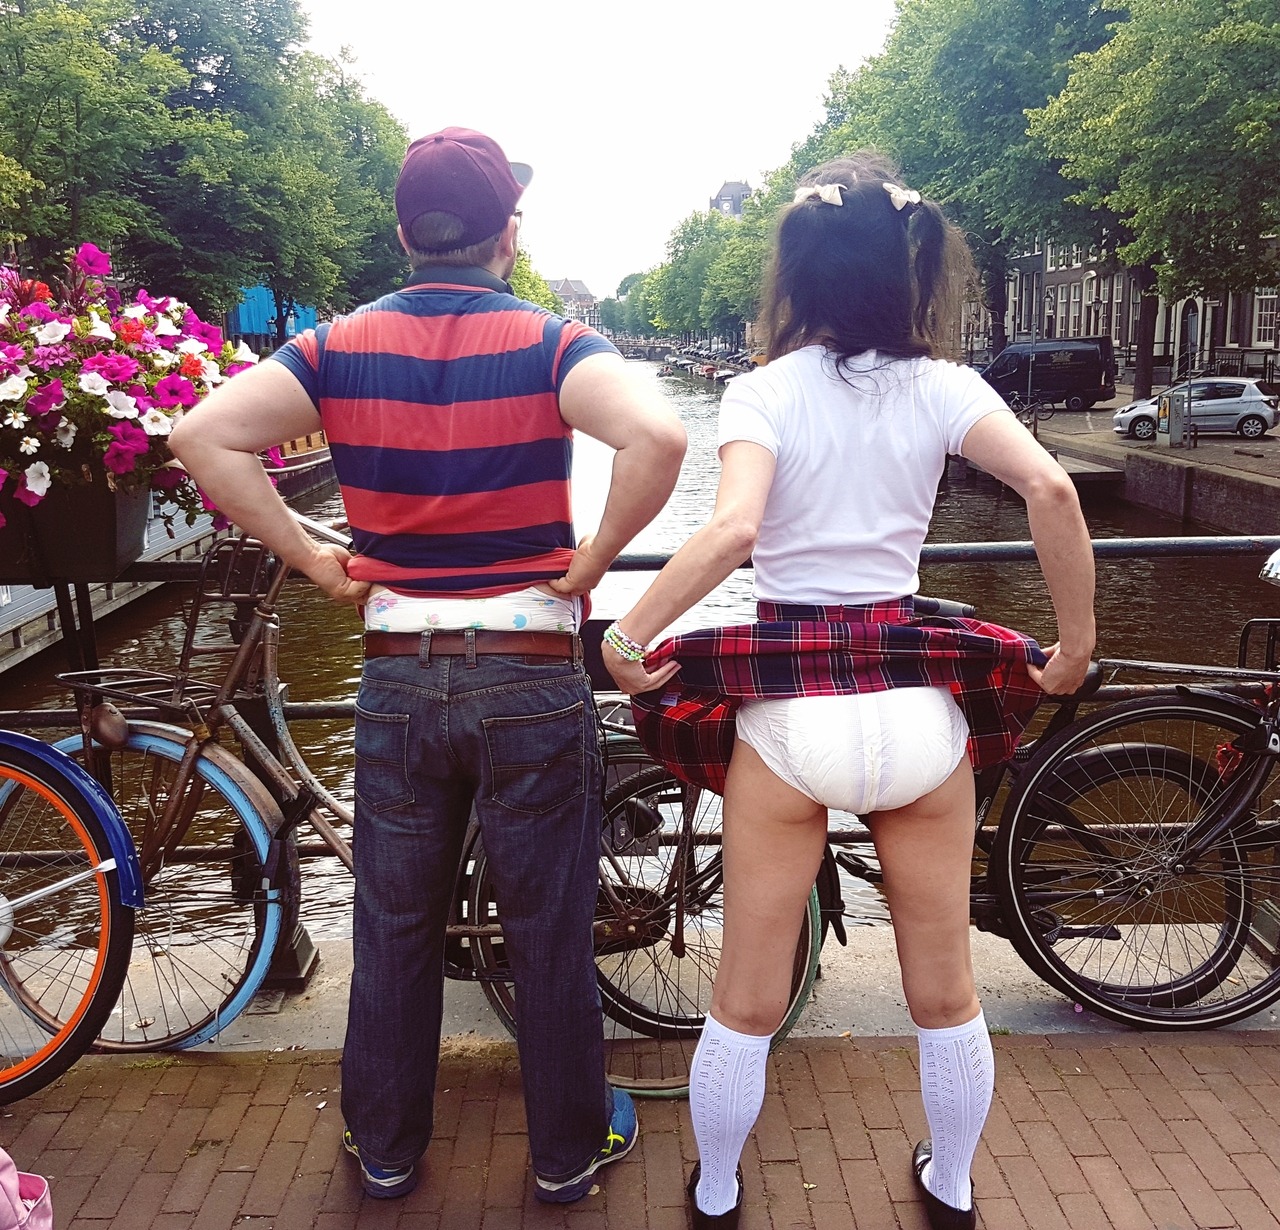 Me and my friend @littlerobbiee enjoyed our walk along the Amsterdam canals in matching